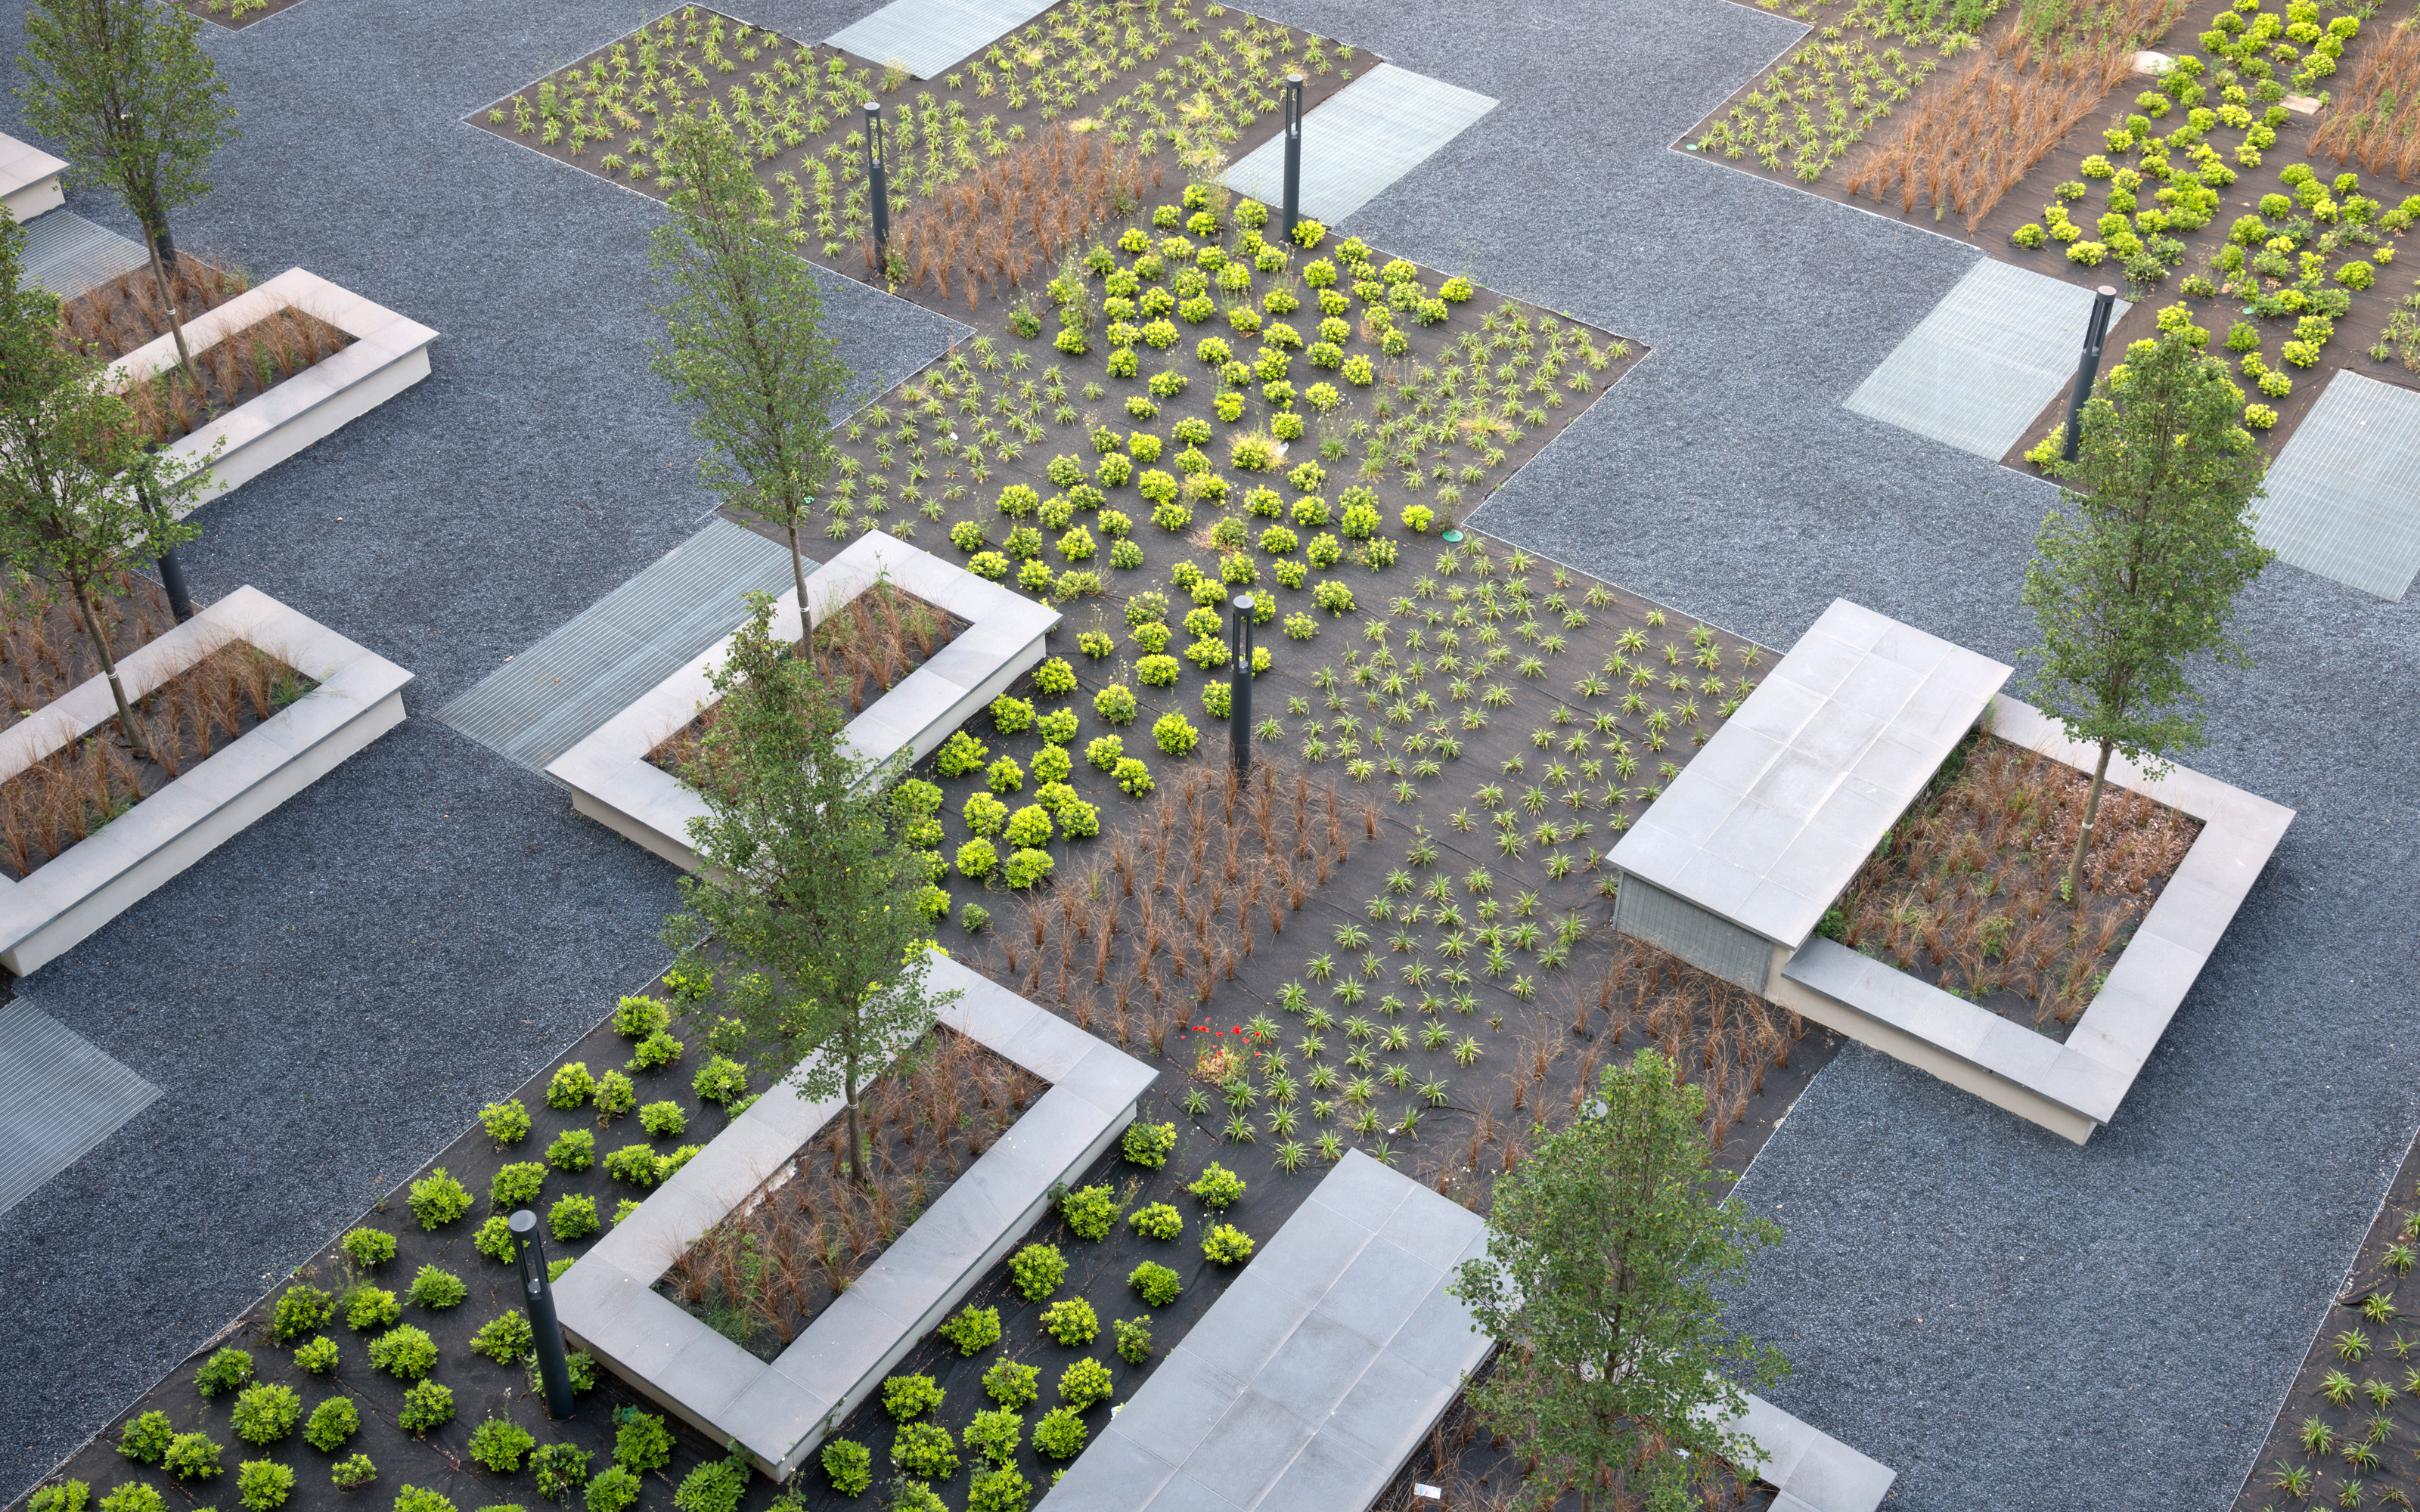 Plant beds with Sedum and small trees between walkways